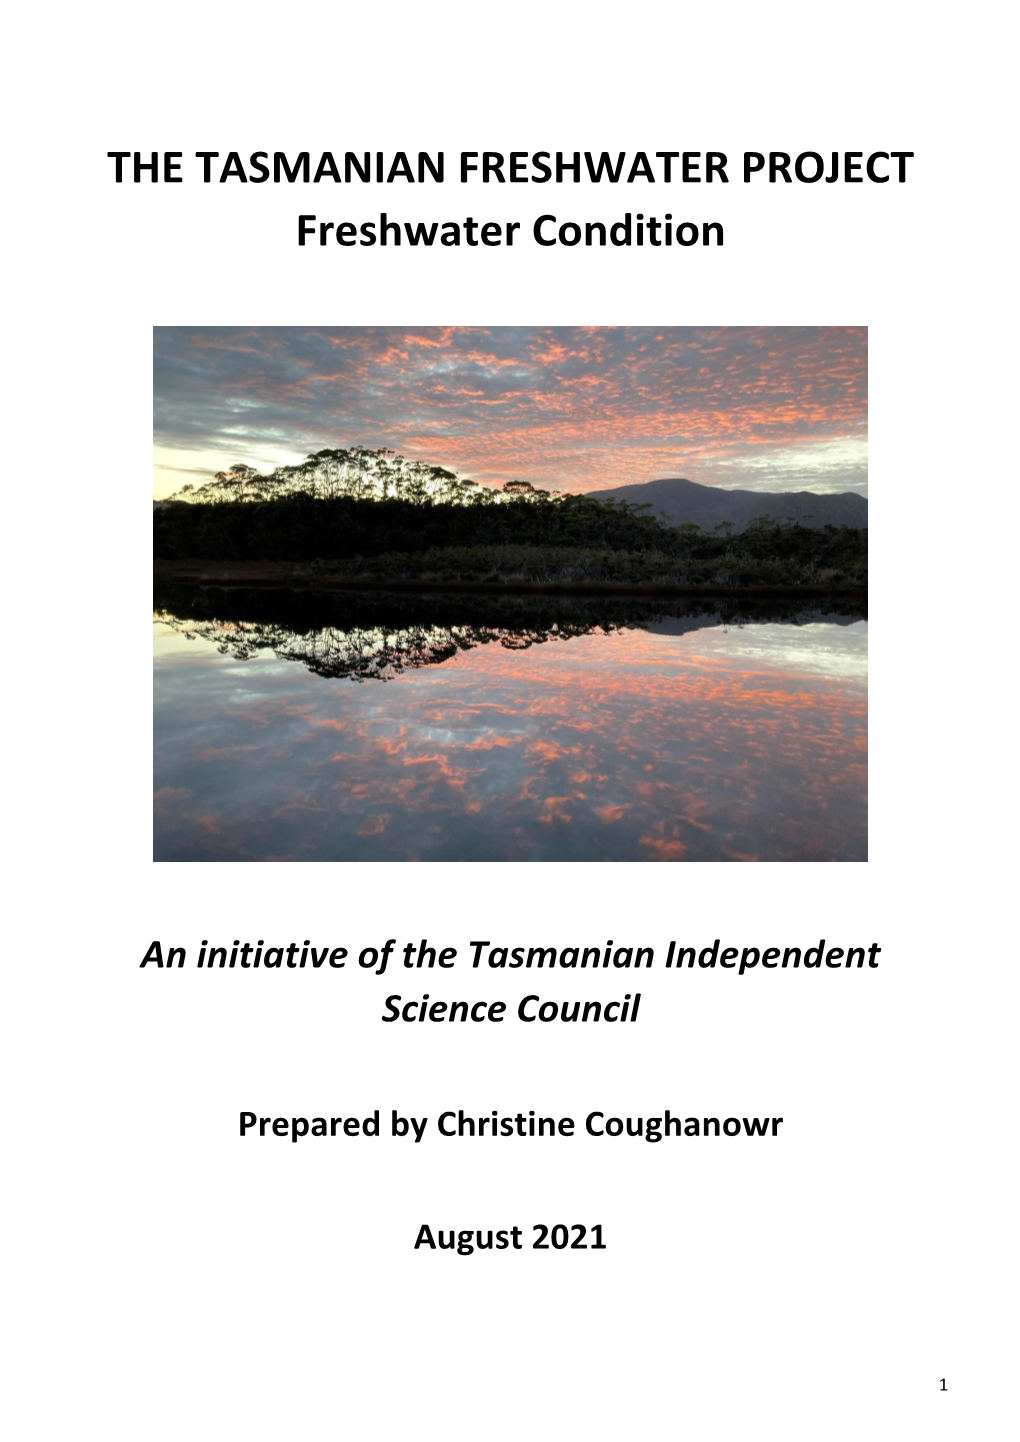 THE TASMANIAN FRESHWATER PROJECT Freshwater Condition